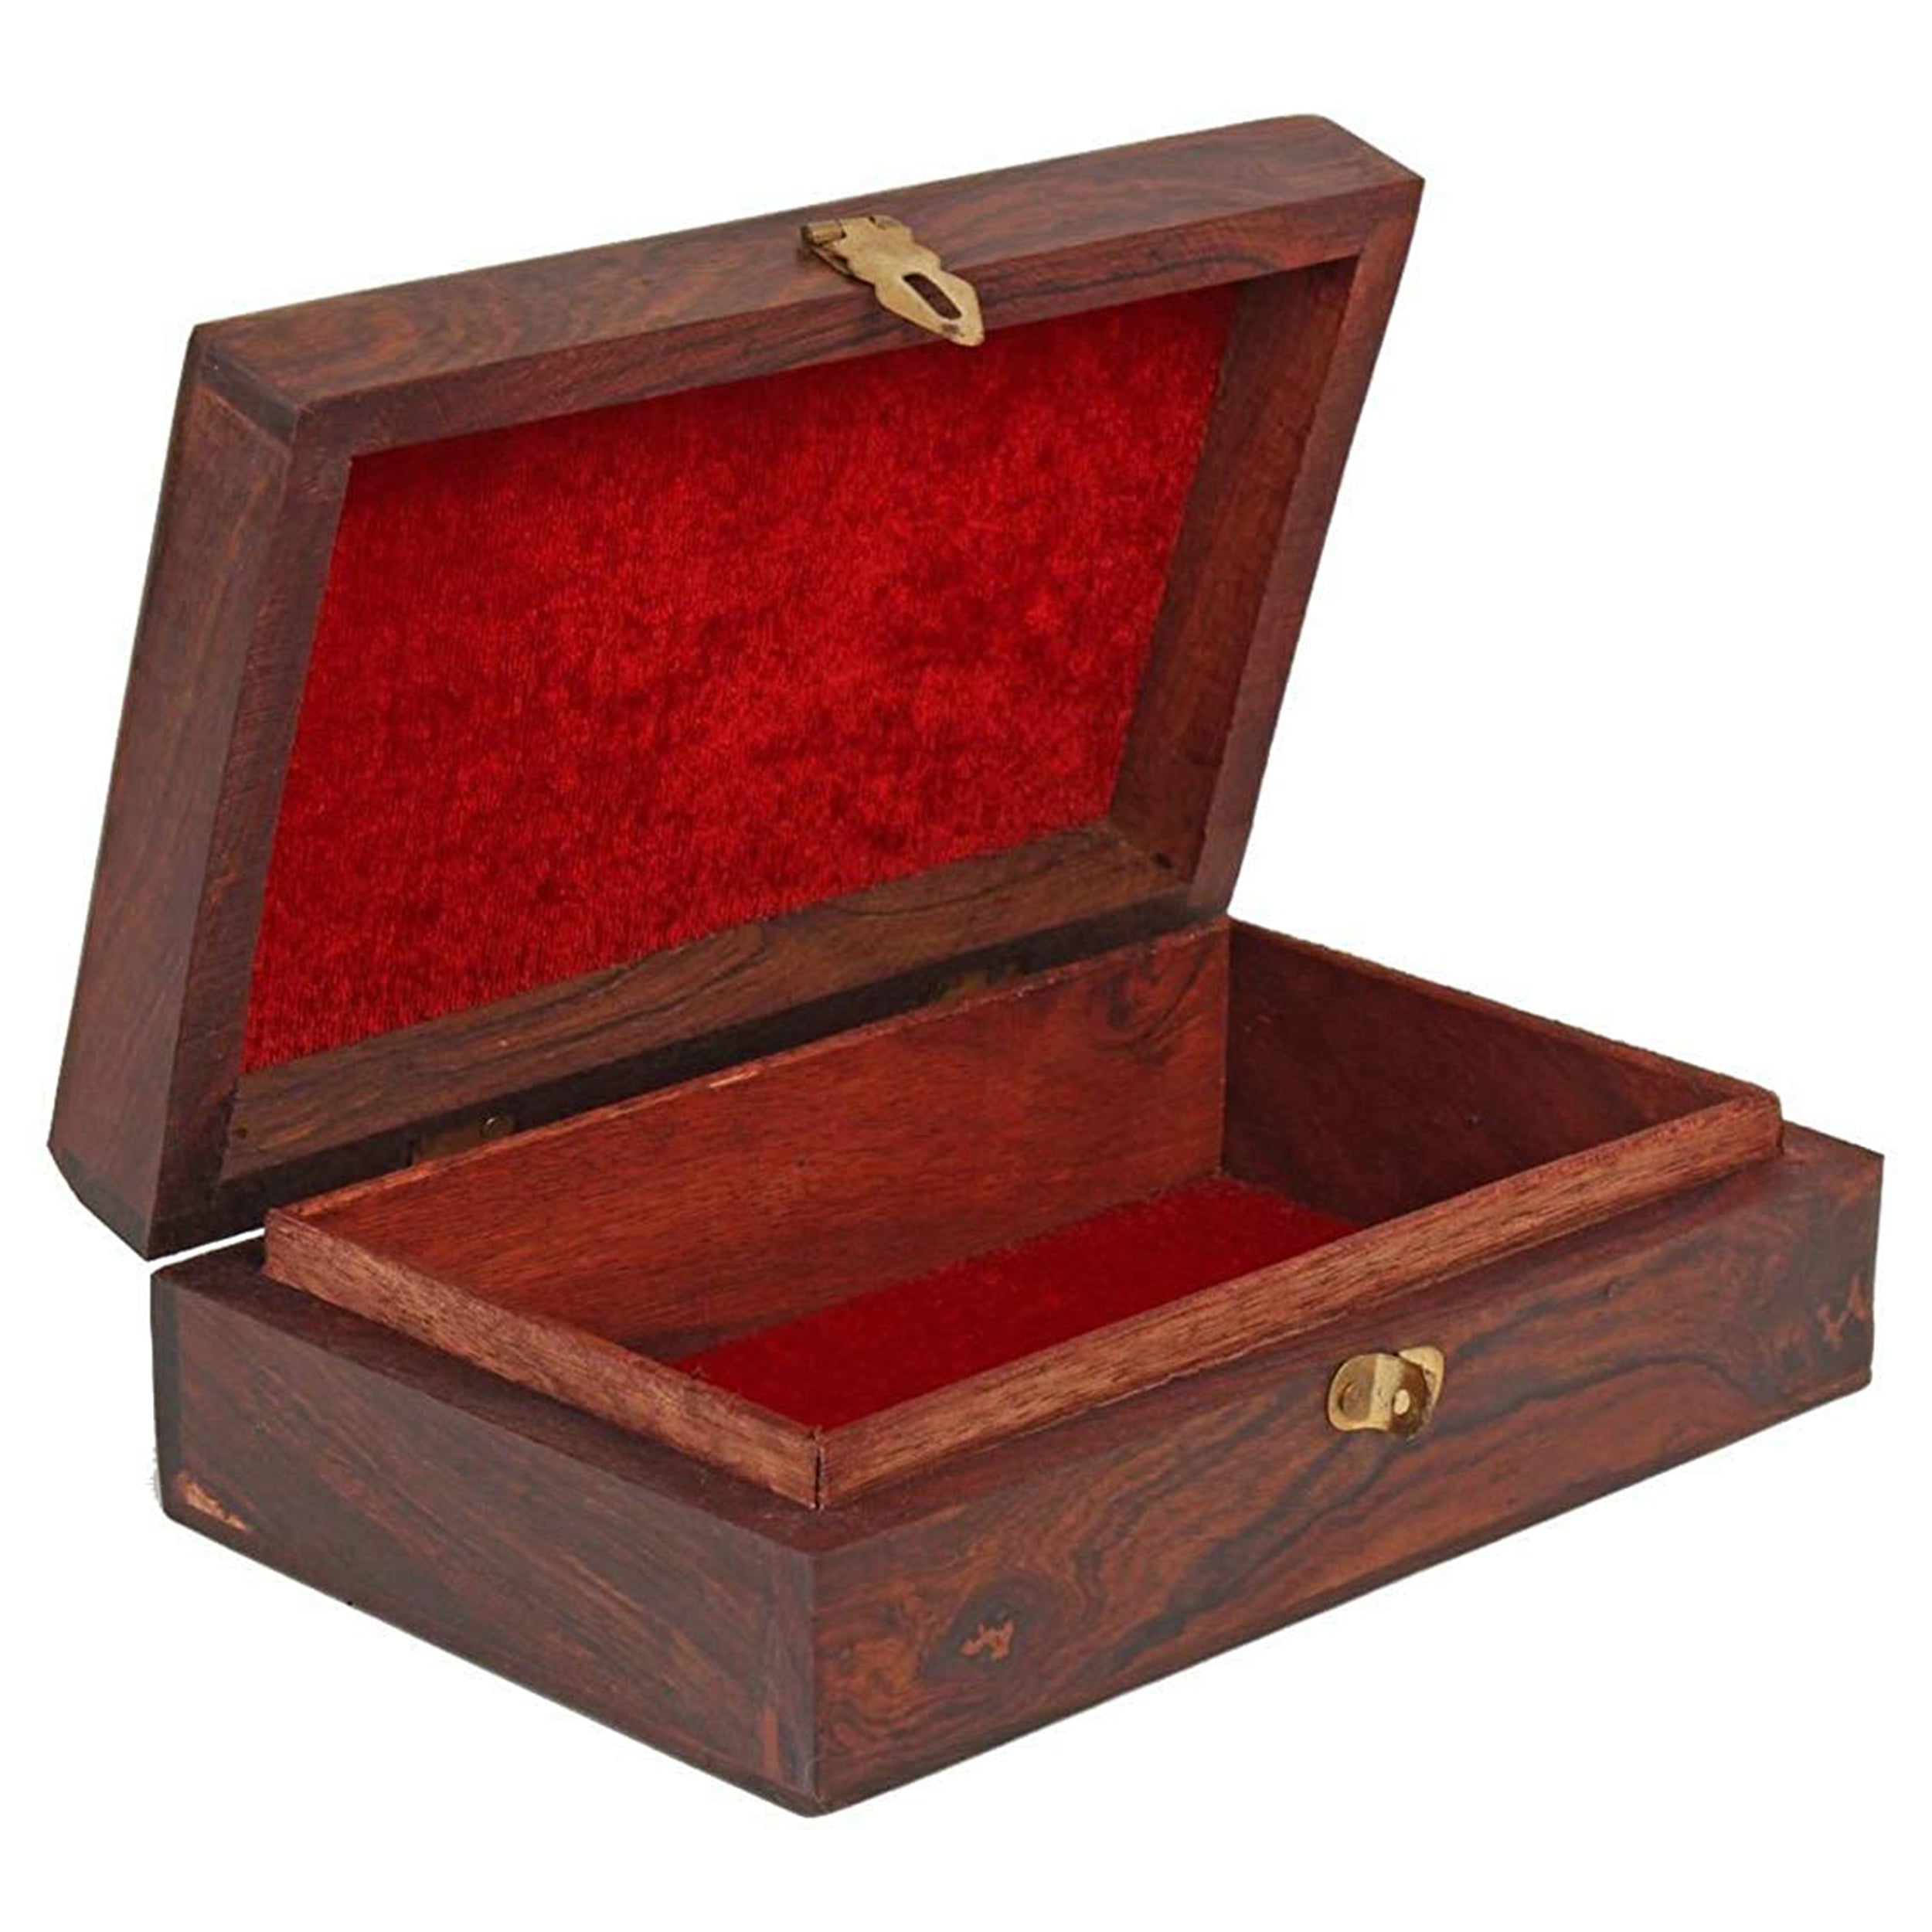 Handcrafted Wooden Decorated Brass-Filled Box - Perfect for Storing Your Valuables